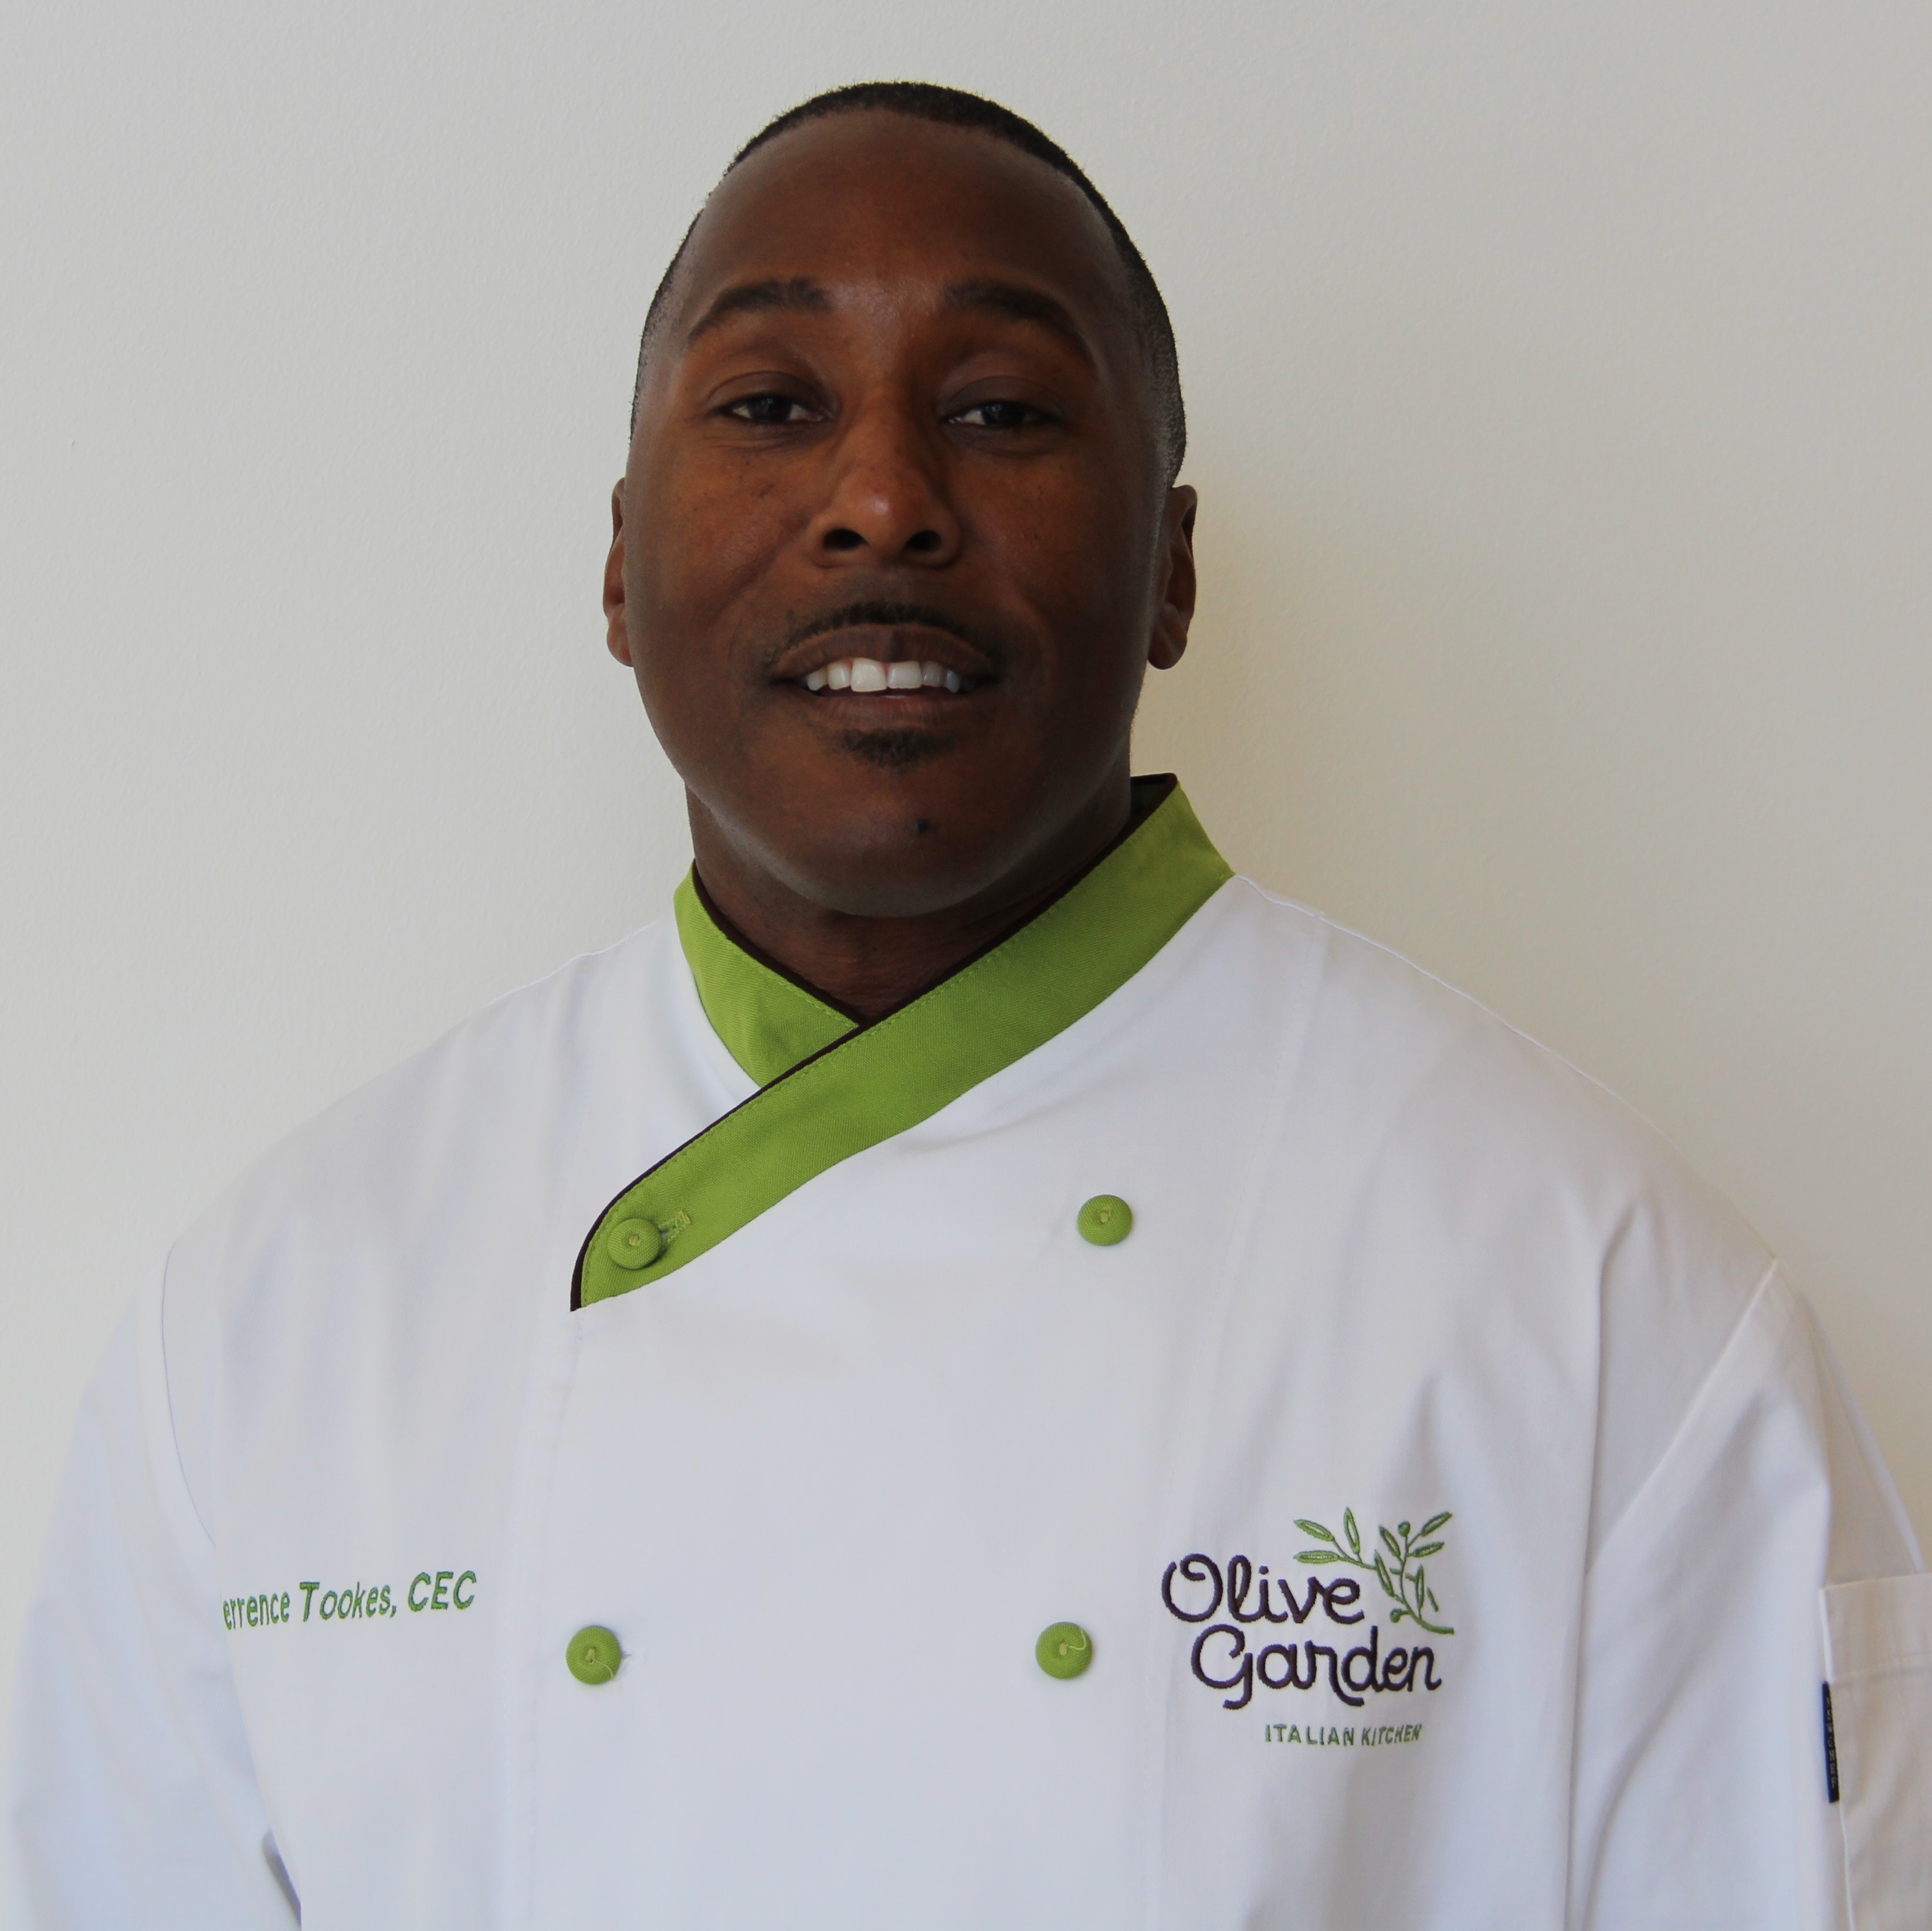 Chef Terrence Tookes